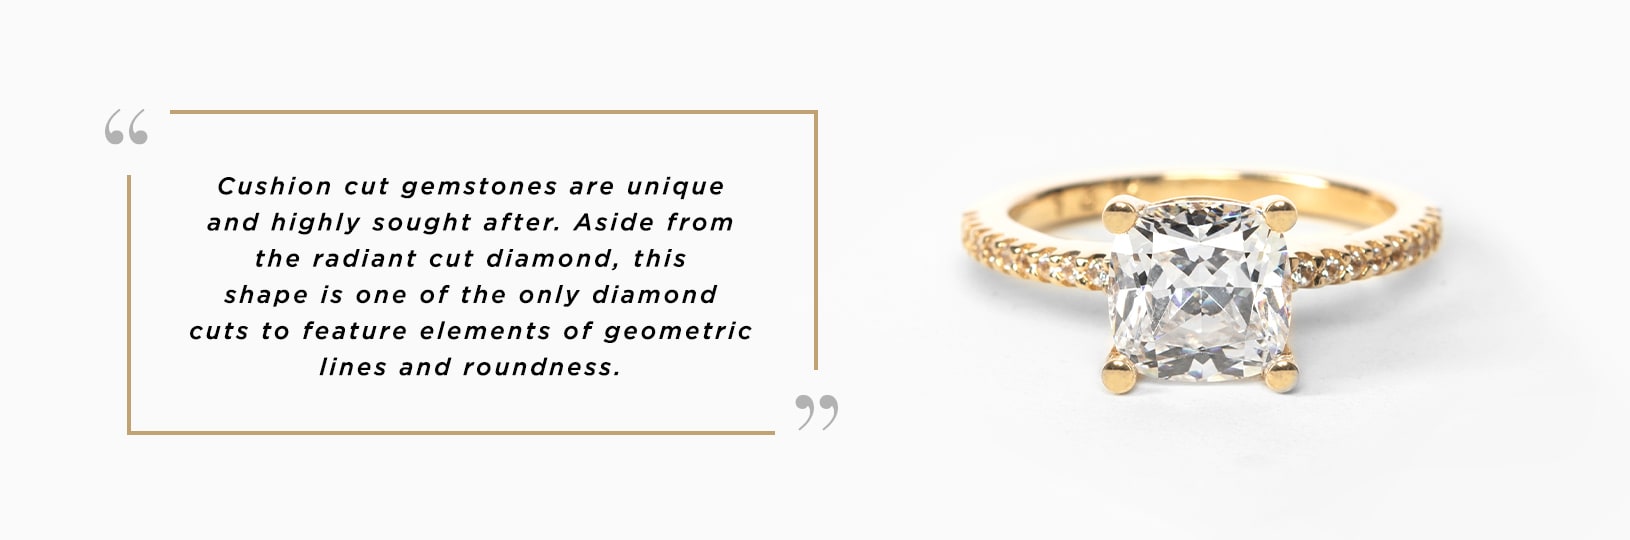 Cushion cut stones feature elements of geometric lines and roundness